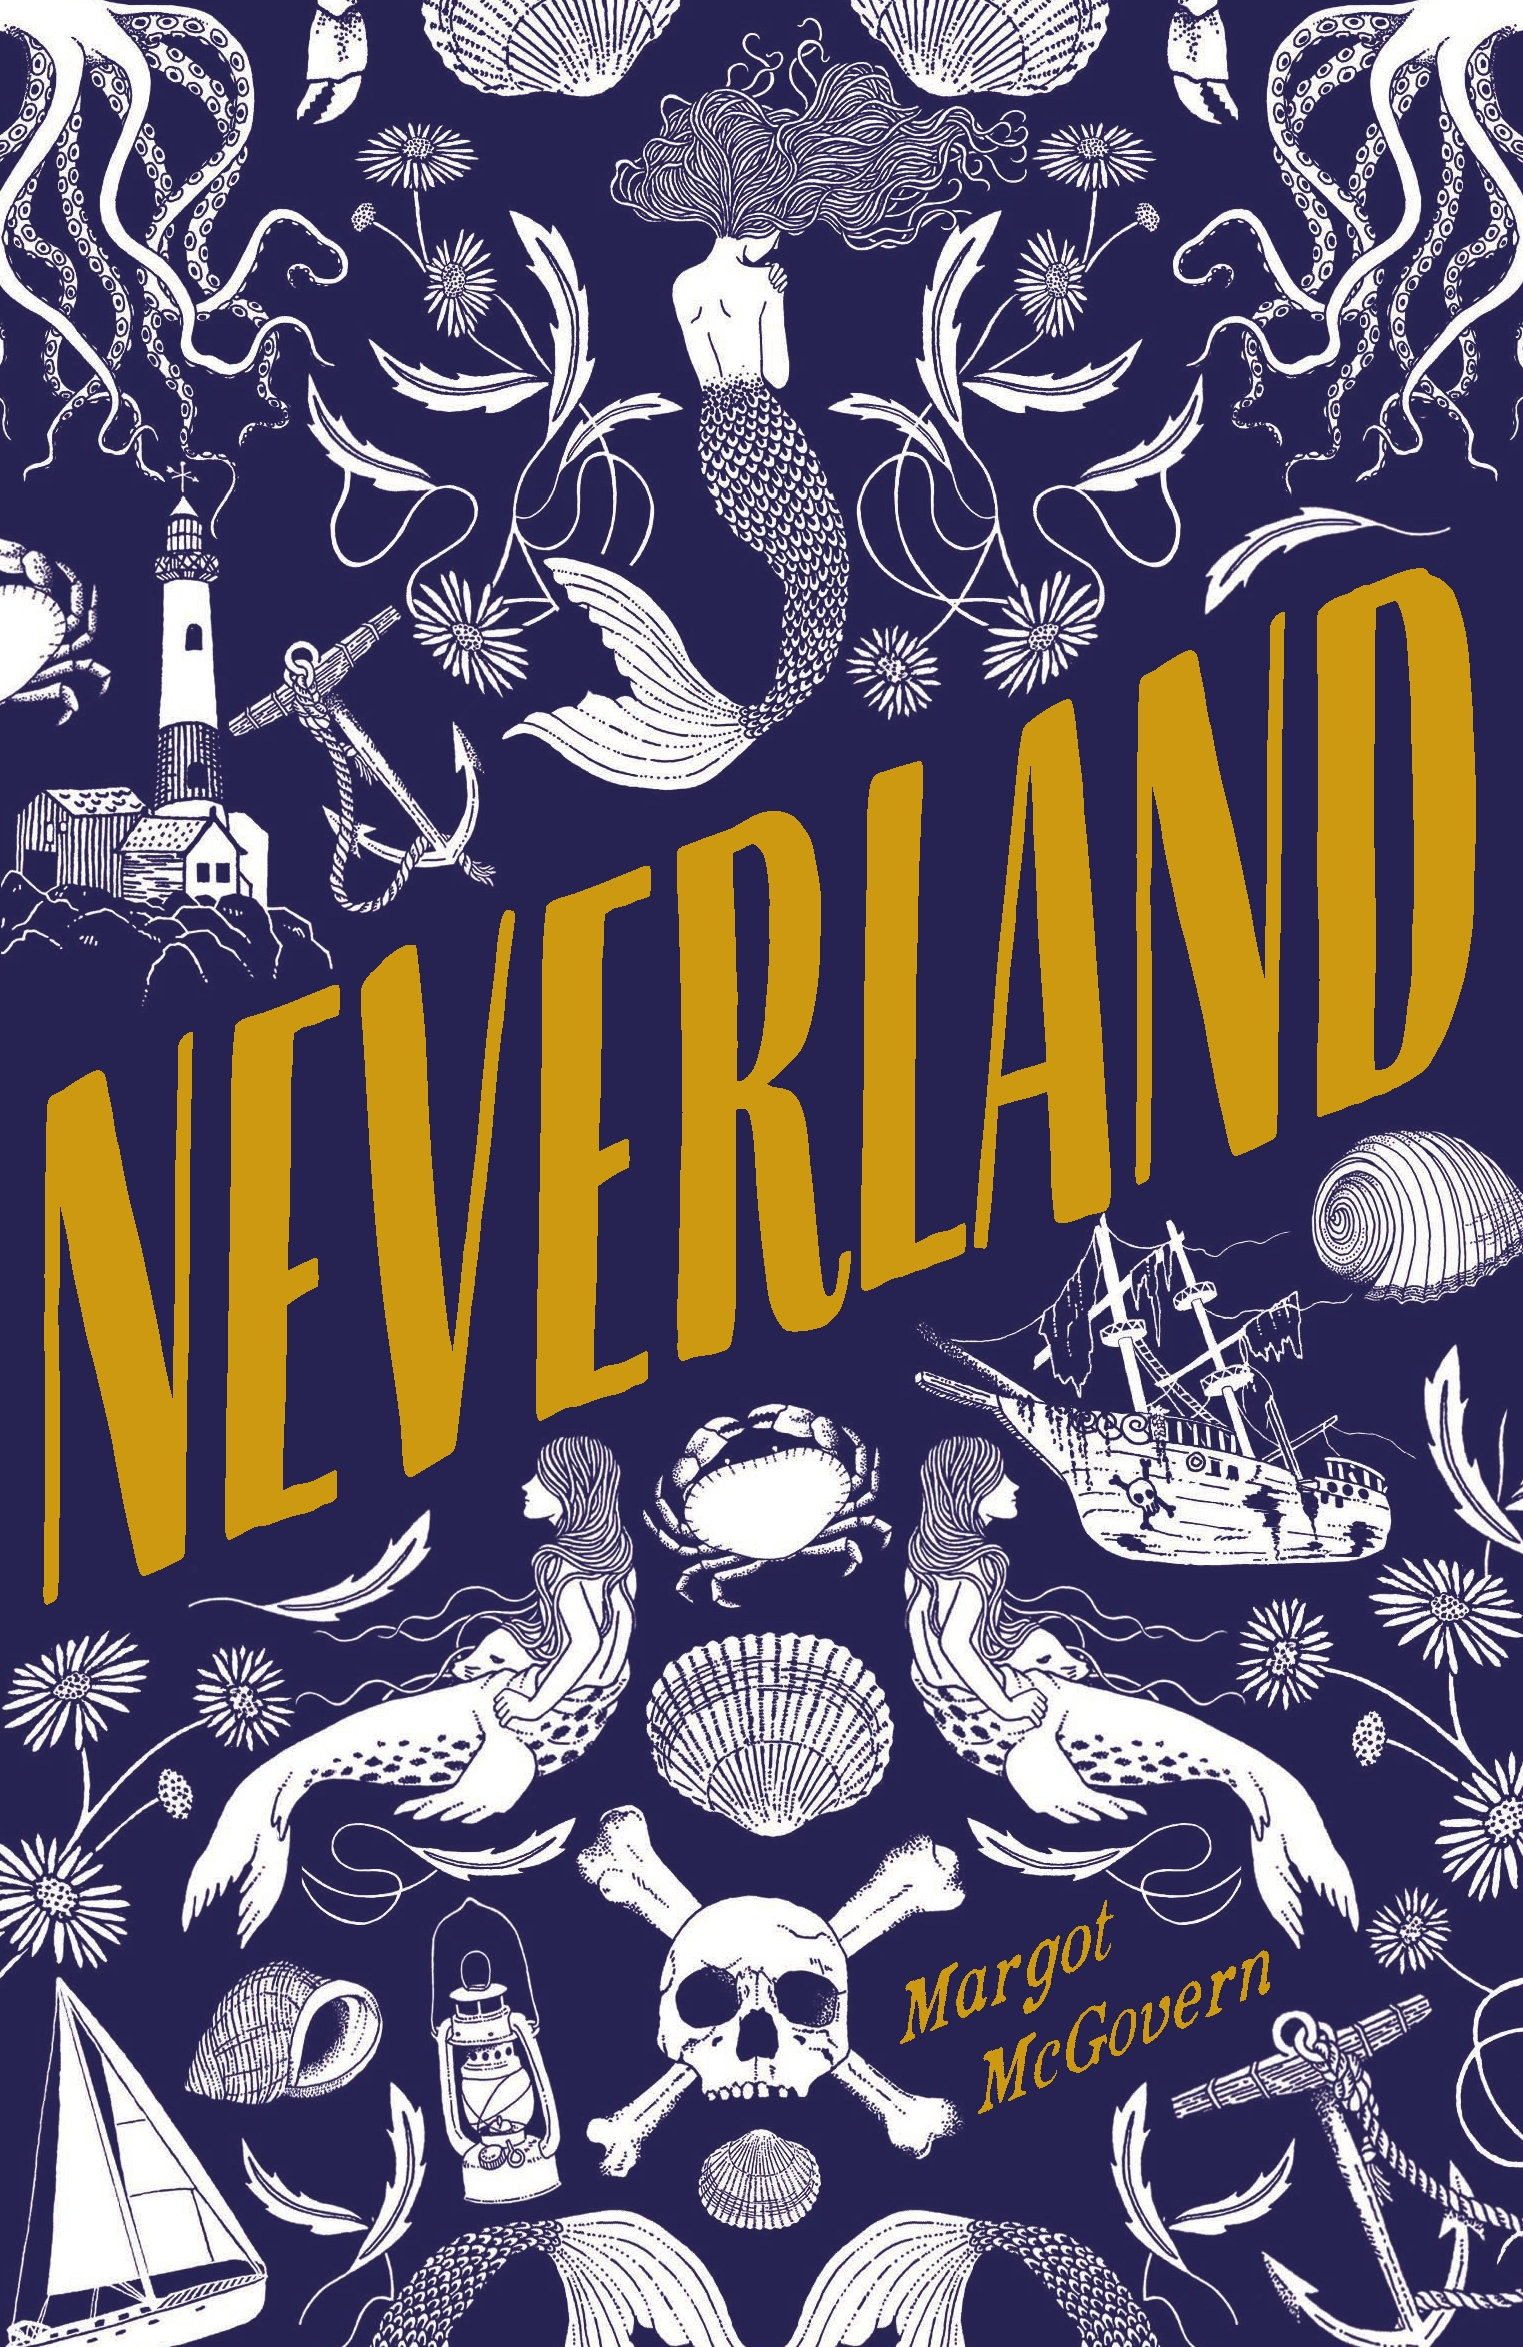 Neverland by Anna Katmore